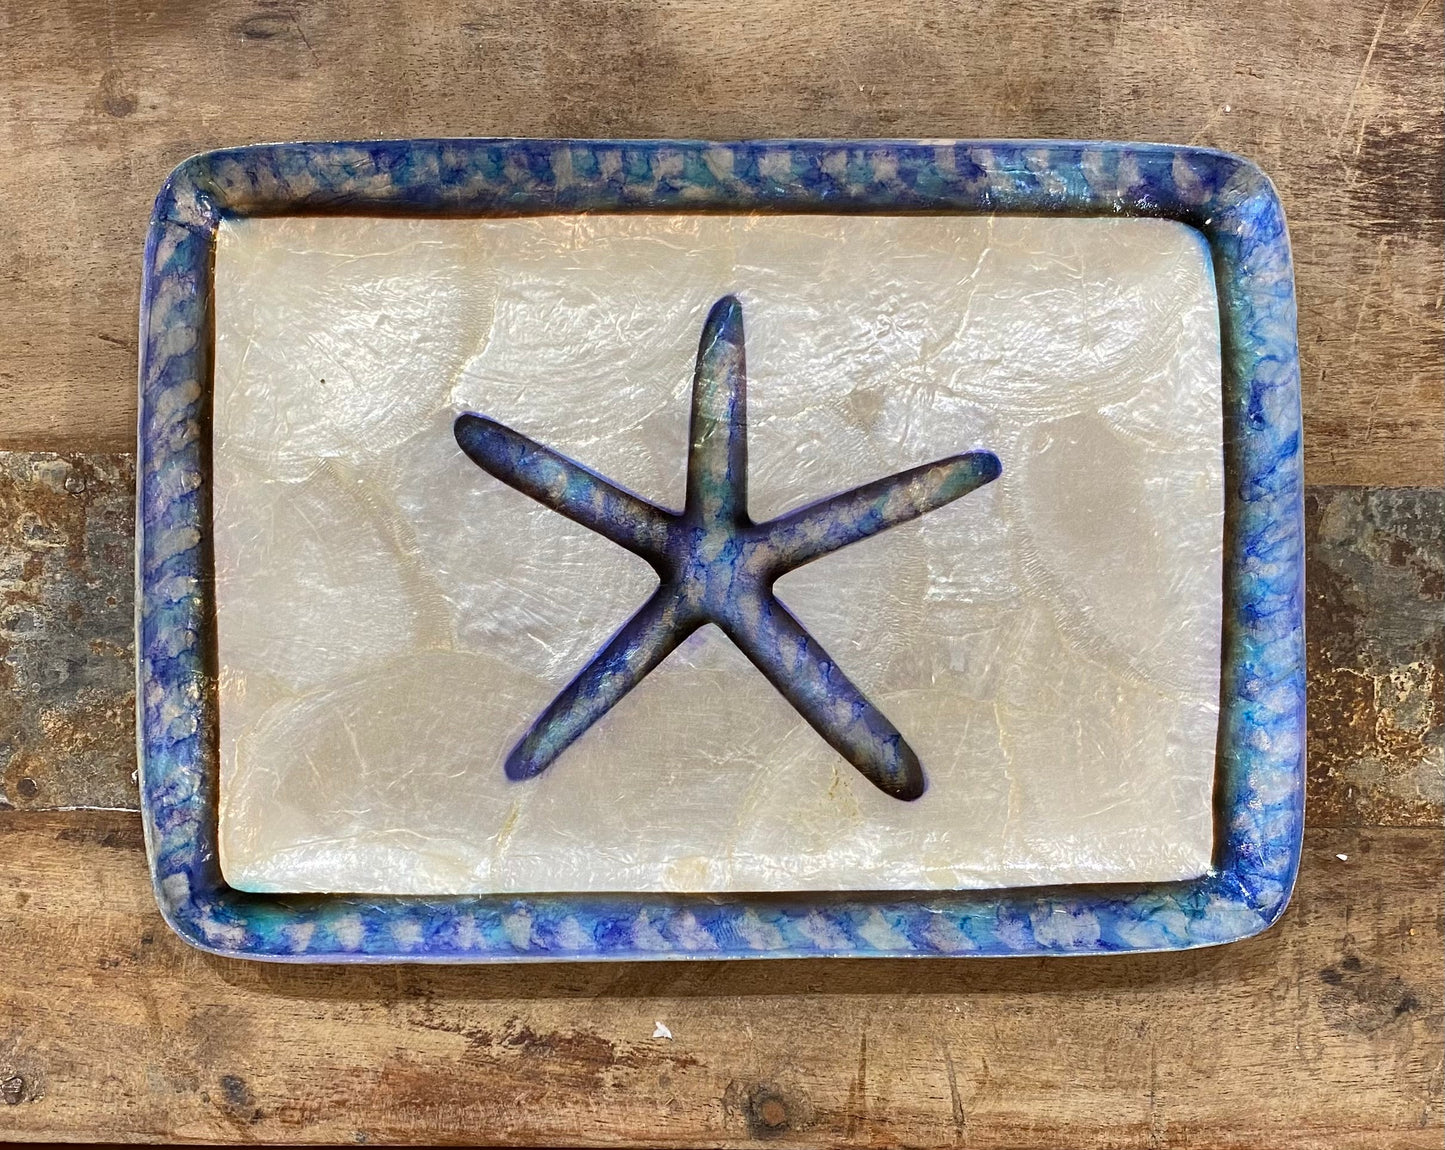 Starfish Capiz Tray - Blue and White - 8-in - Mellow Monkey